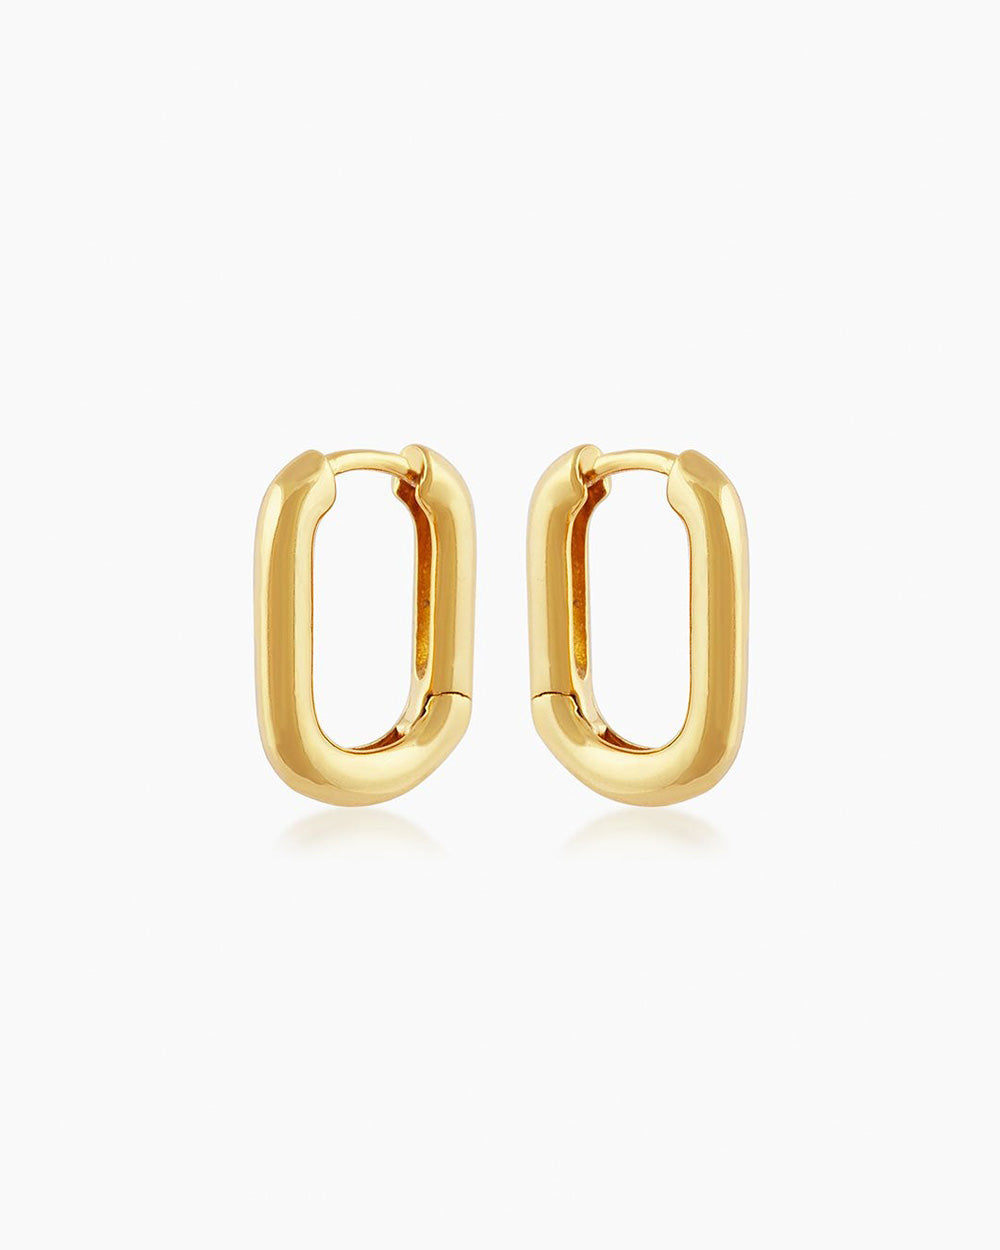 The Venus Huggies, oval-shaped gold earrings that exude elegant simplicity